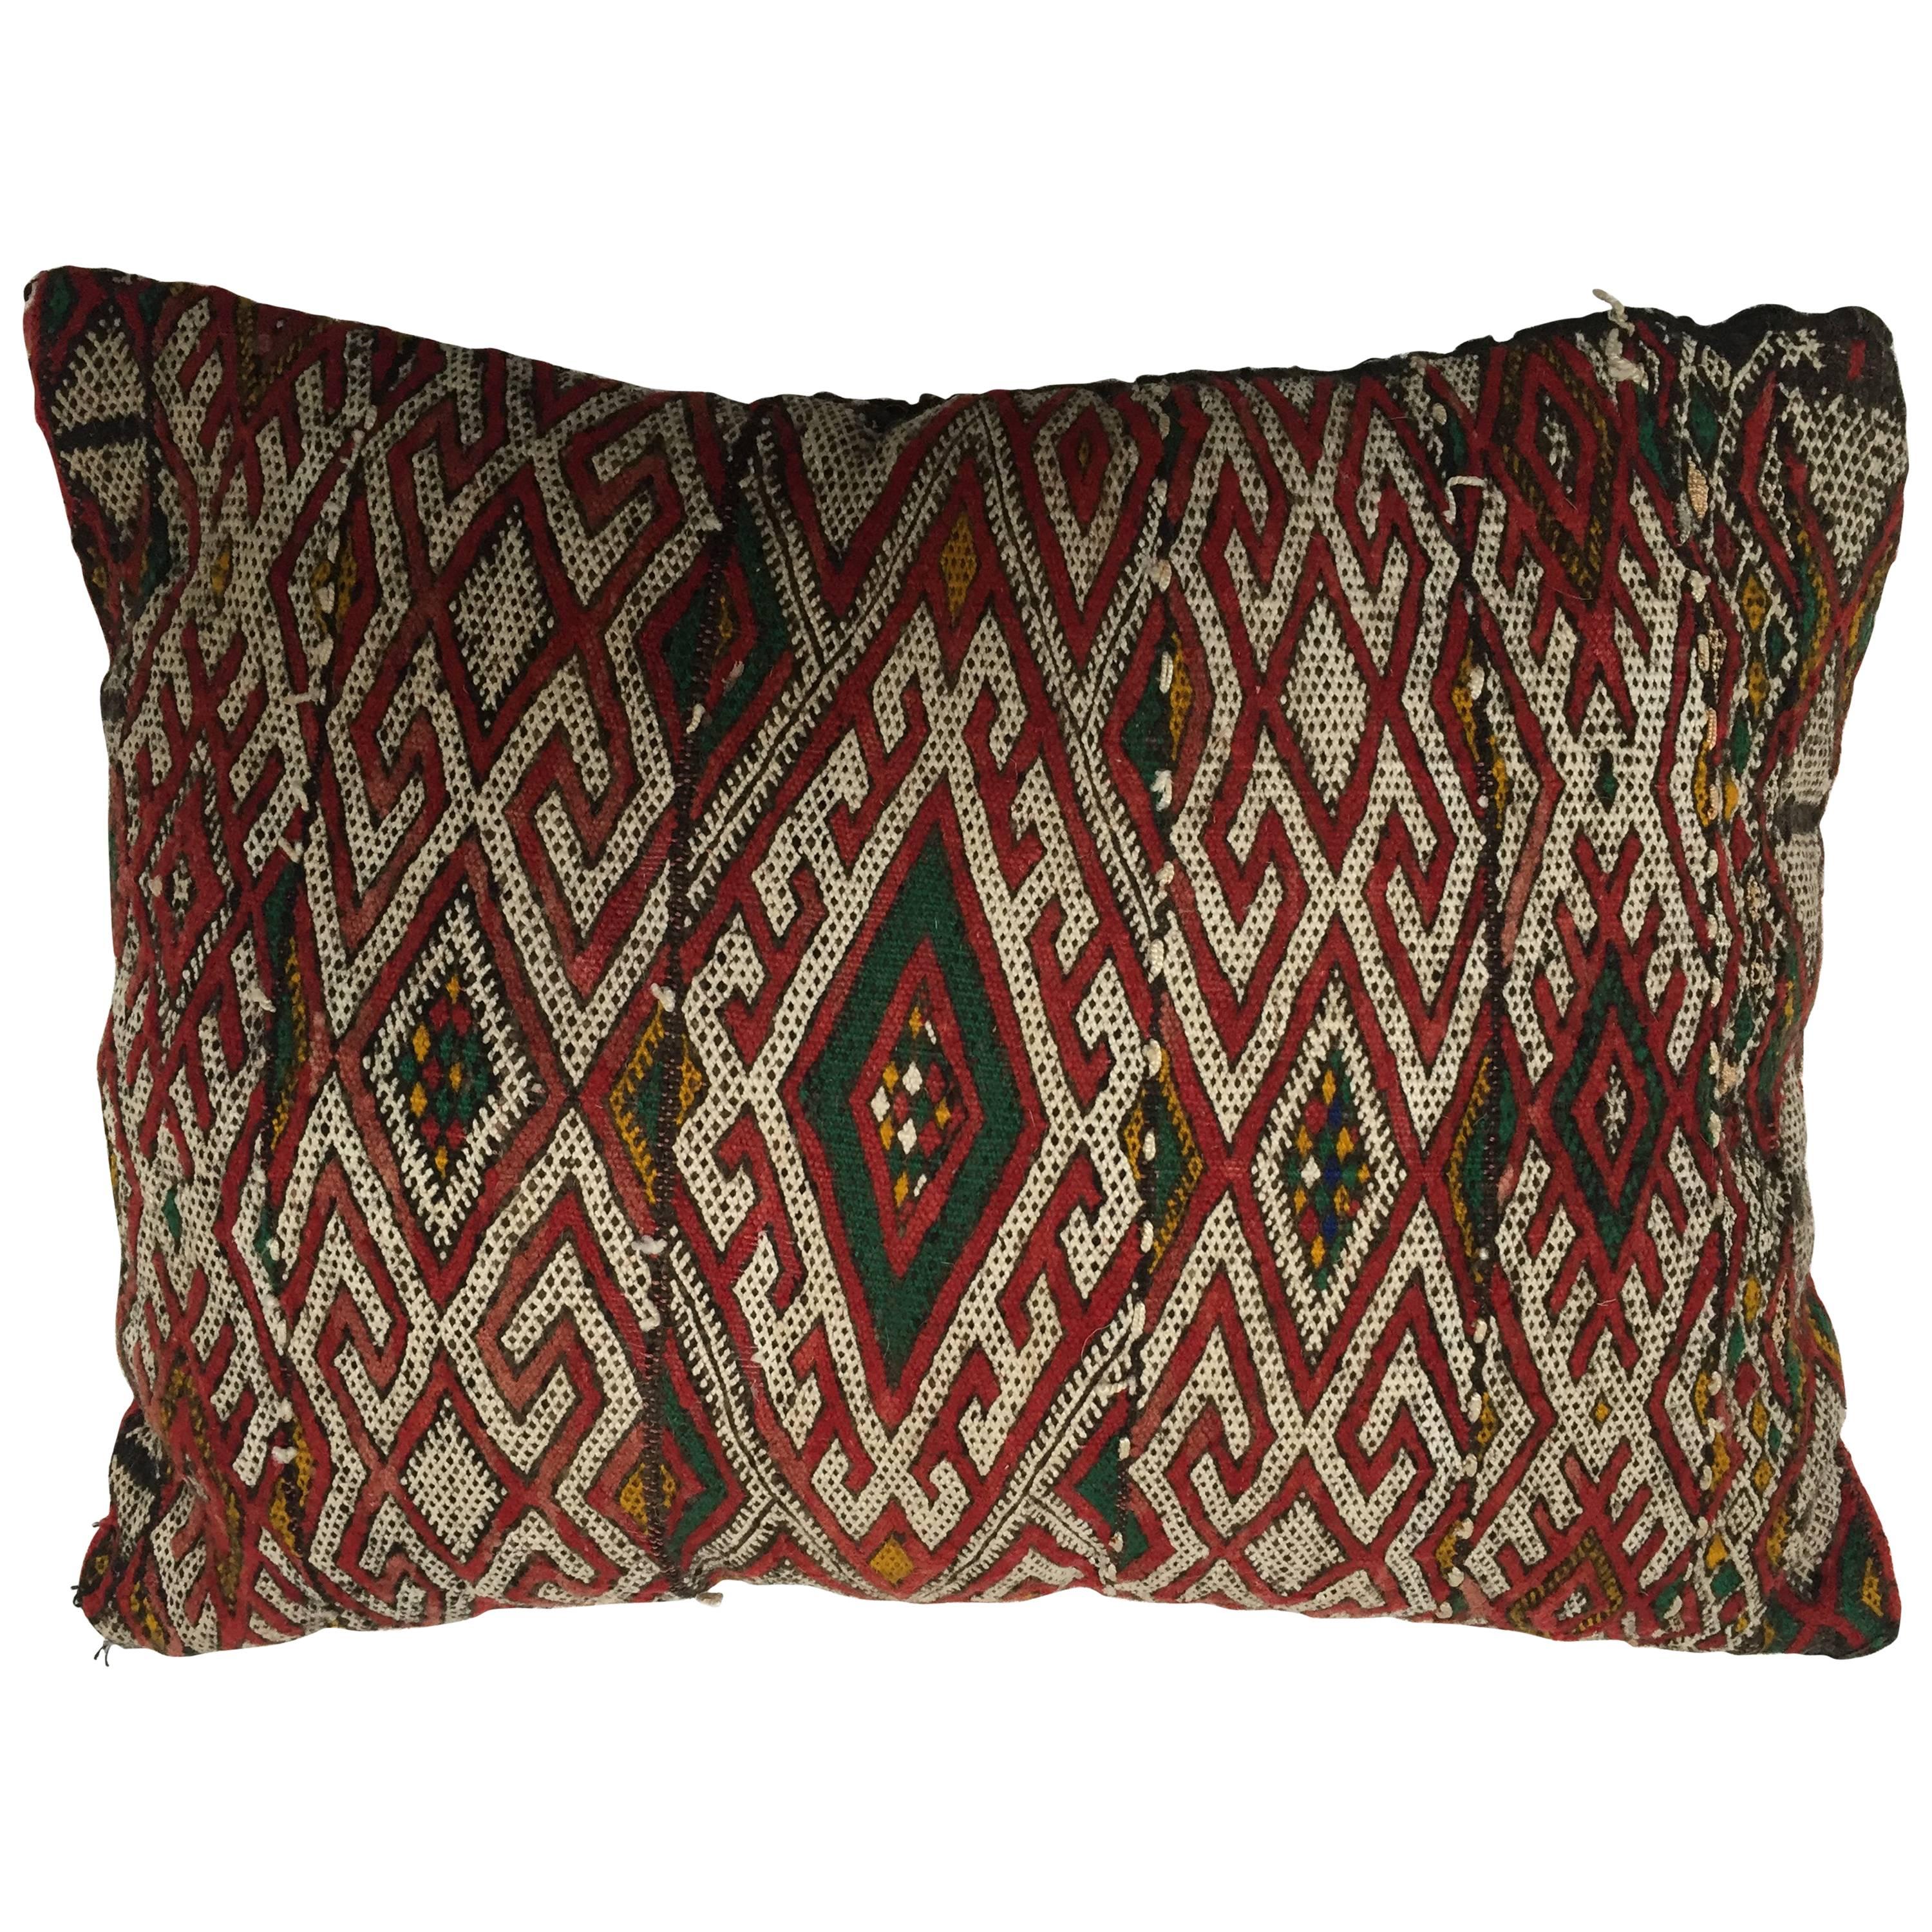 Moroccan Berber Handwoven Tribal Throw Pillow Made from a Vintage Rug